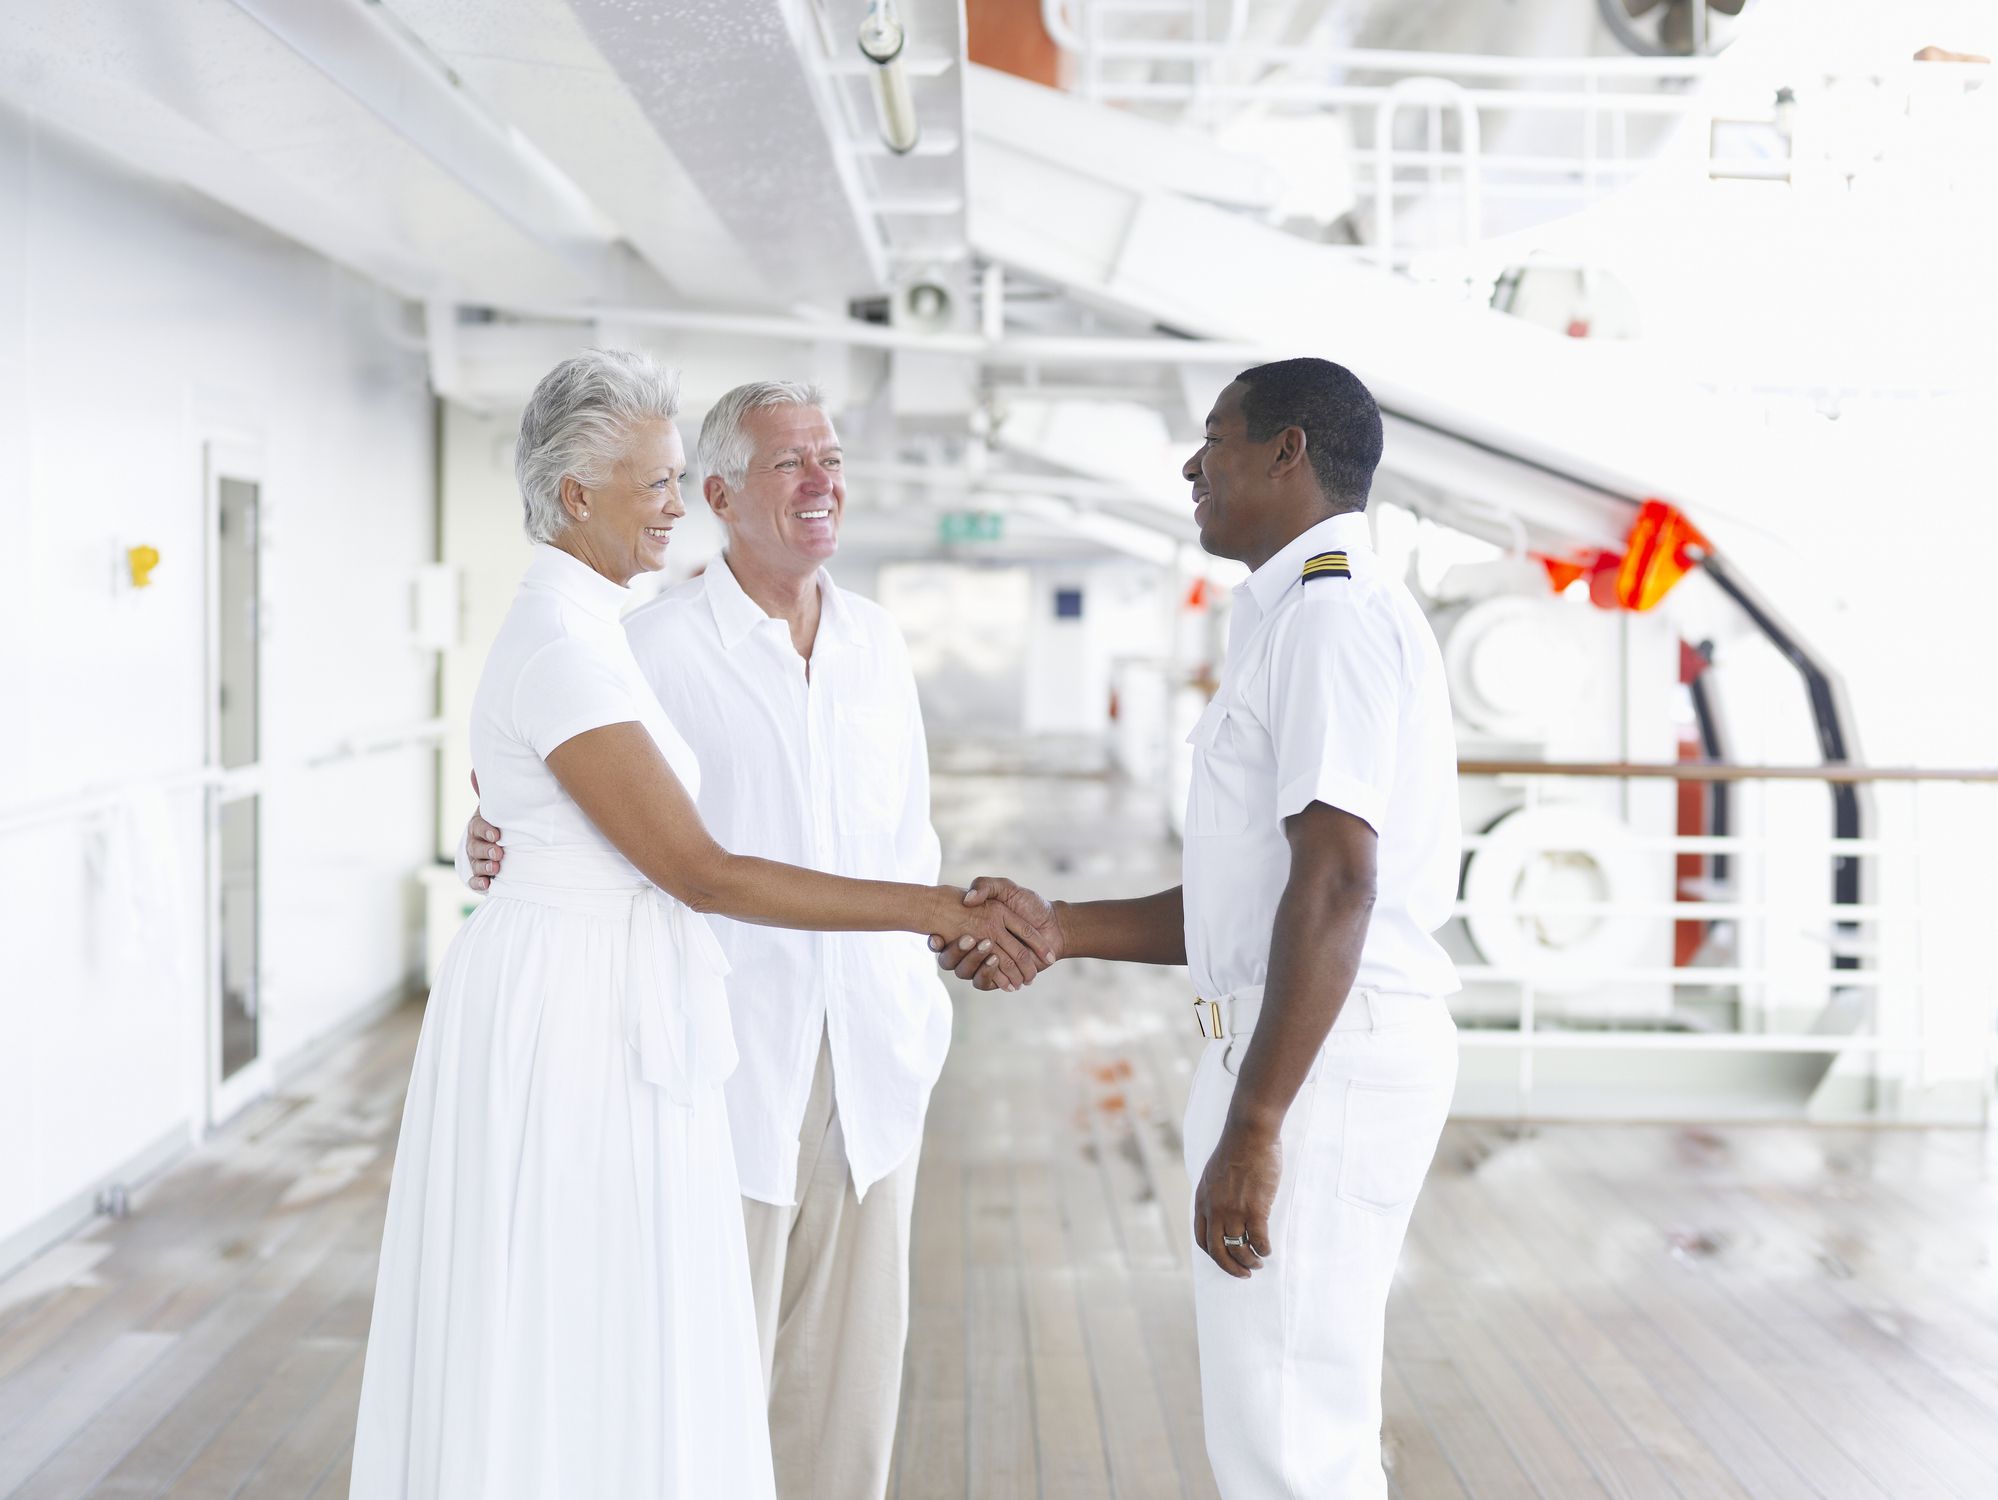 <p>Despite these challenges, some users pointed out that working on a cruise ship provided them with unique experiences and memories that led to significant personal and professional growth. "Worked on a Carnival cruise line for 4 years in the spa," <a href="https://www.reddit.com/r/Cruise/comments/15yzie9/comment/jxfm2o5/?utm_source=share&utm_medium=web3x&utm_name=web3xcss&utm_term=1&utm_content=share_button">writes one user.</a> "It is what you make of it — you can complain about long hours and little pay, or see it as getting paid to travel. I saw more of the world than I would’ve [been able to] and don’t regret a thing about it."</p><p>Other employees also noted the opportunity to travel the world, meet new people, and gain valuable industry experience as key benefits of their job.</p><div class="rich-text"><p>This article was originally published on <a href="https://blog.cheapism.com/whats-its-like-to-work-cruise-ship/">Cheapism</a></p></div>